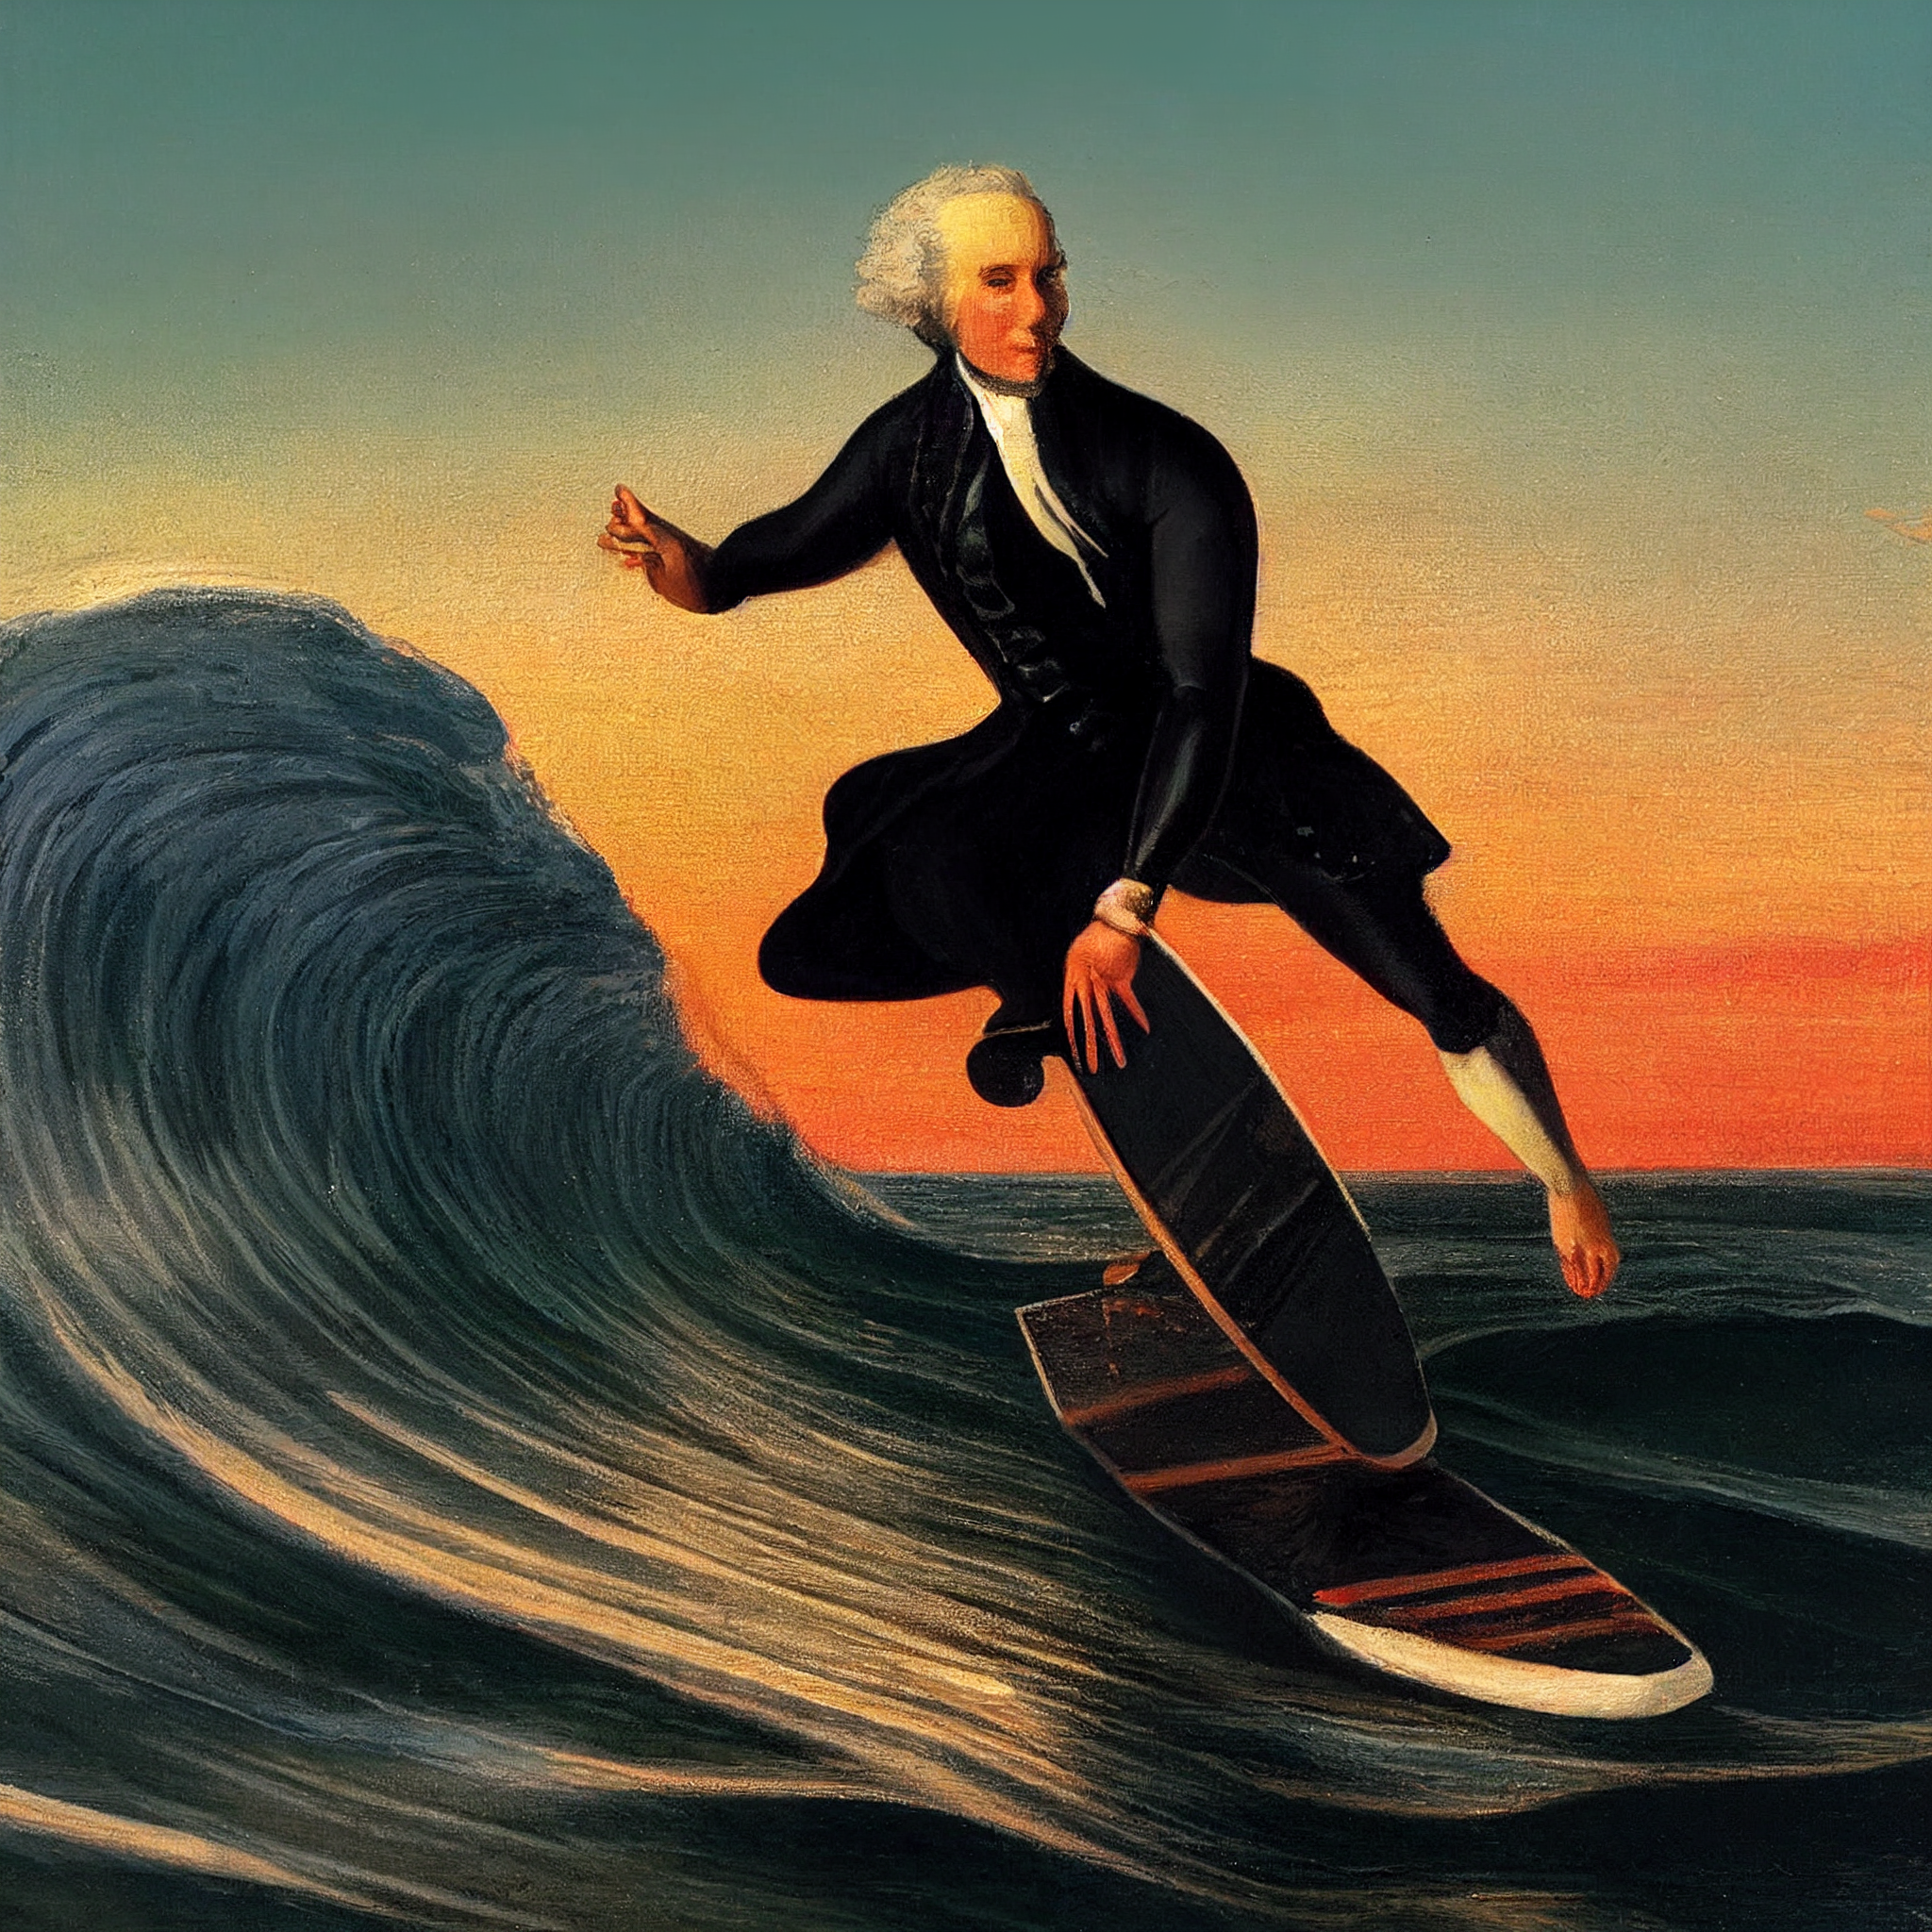 Tora greenster immanuel kant surfing on a wave at sunset in the b1a07f0e-7d86-4919-aea1-60e5711dd590